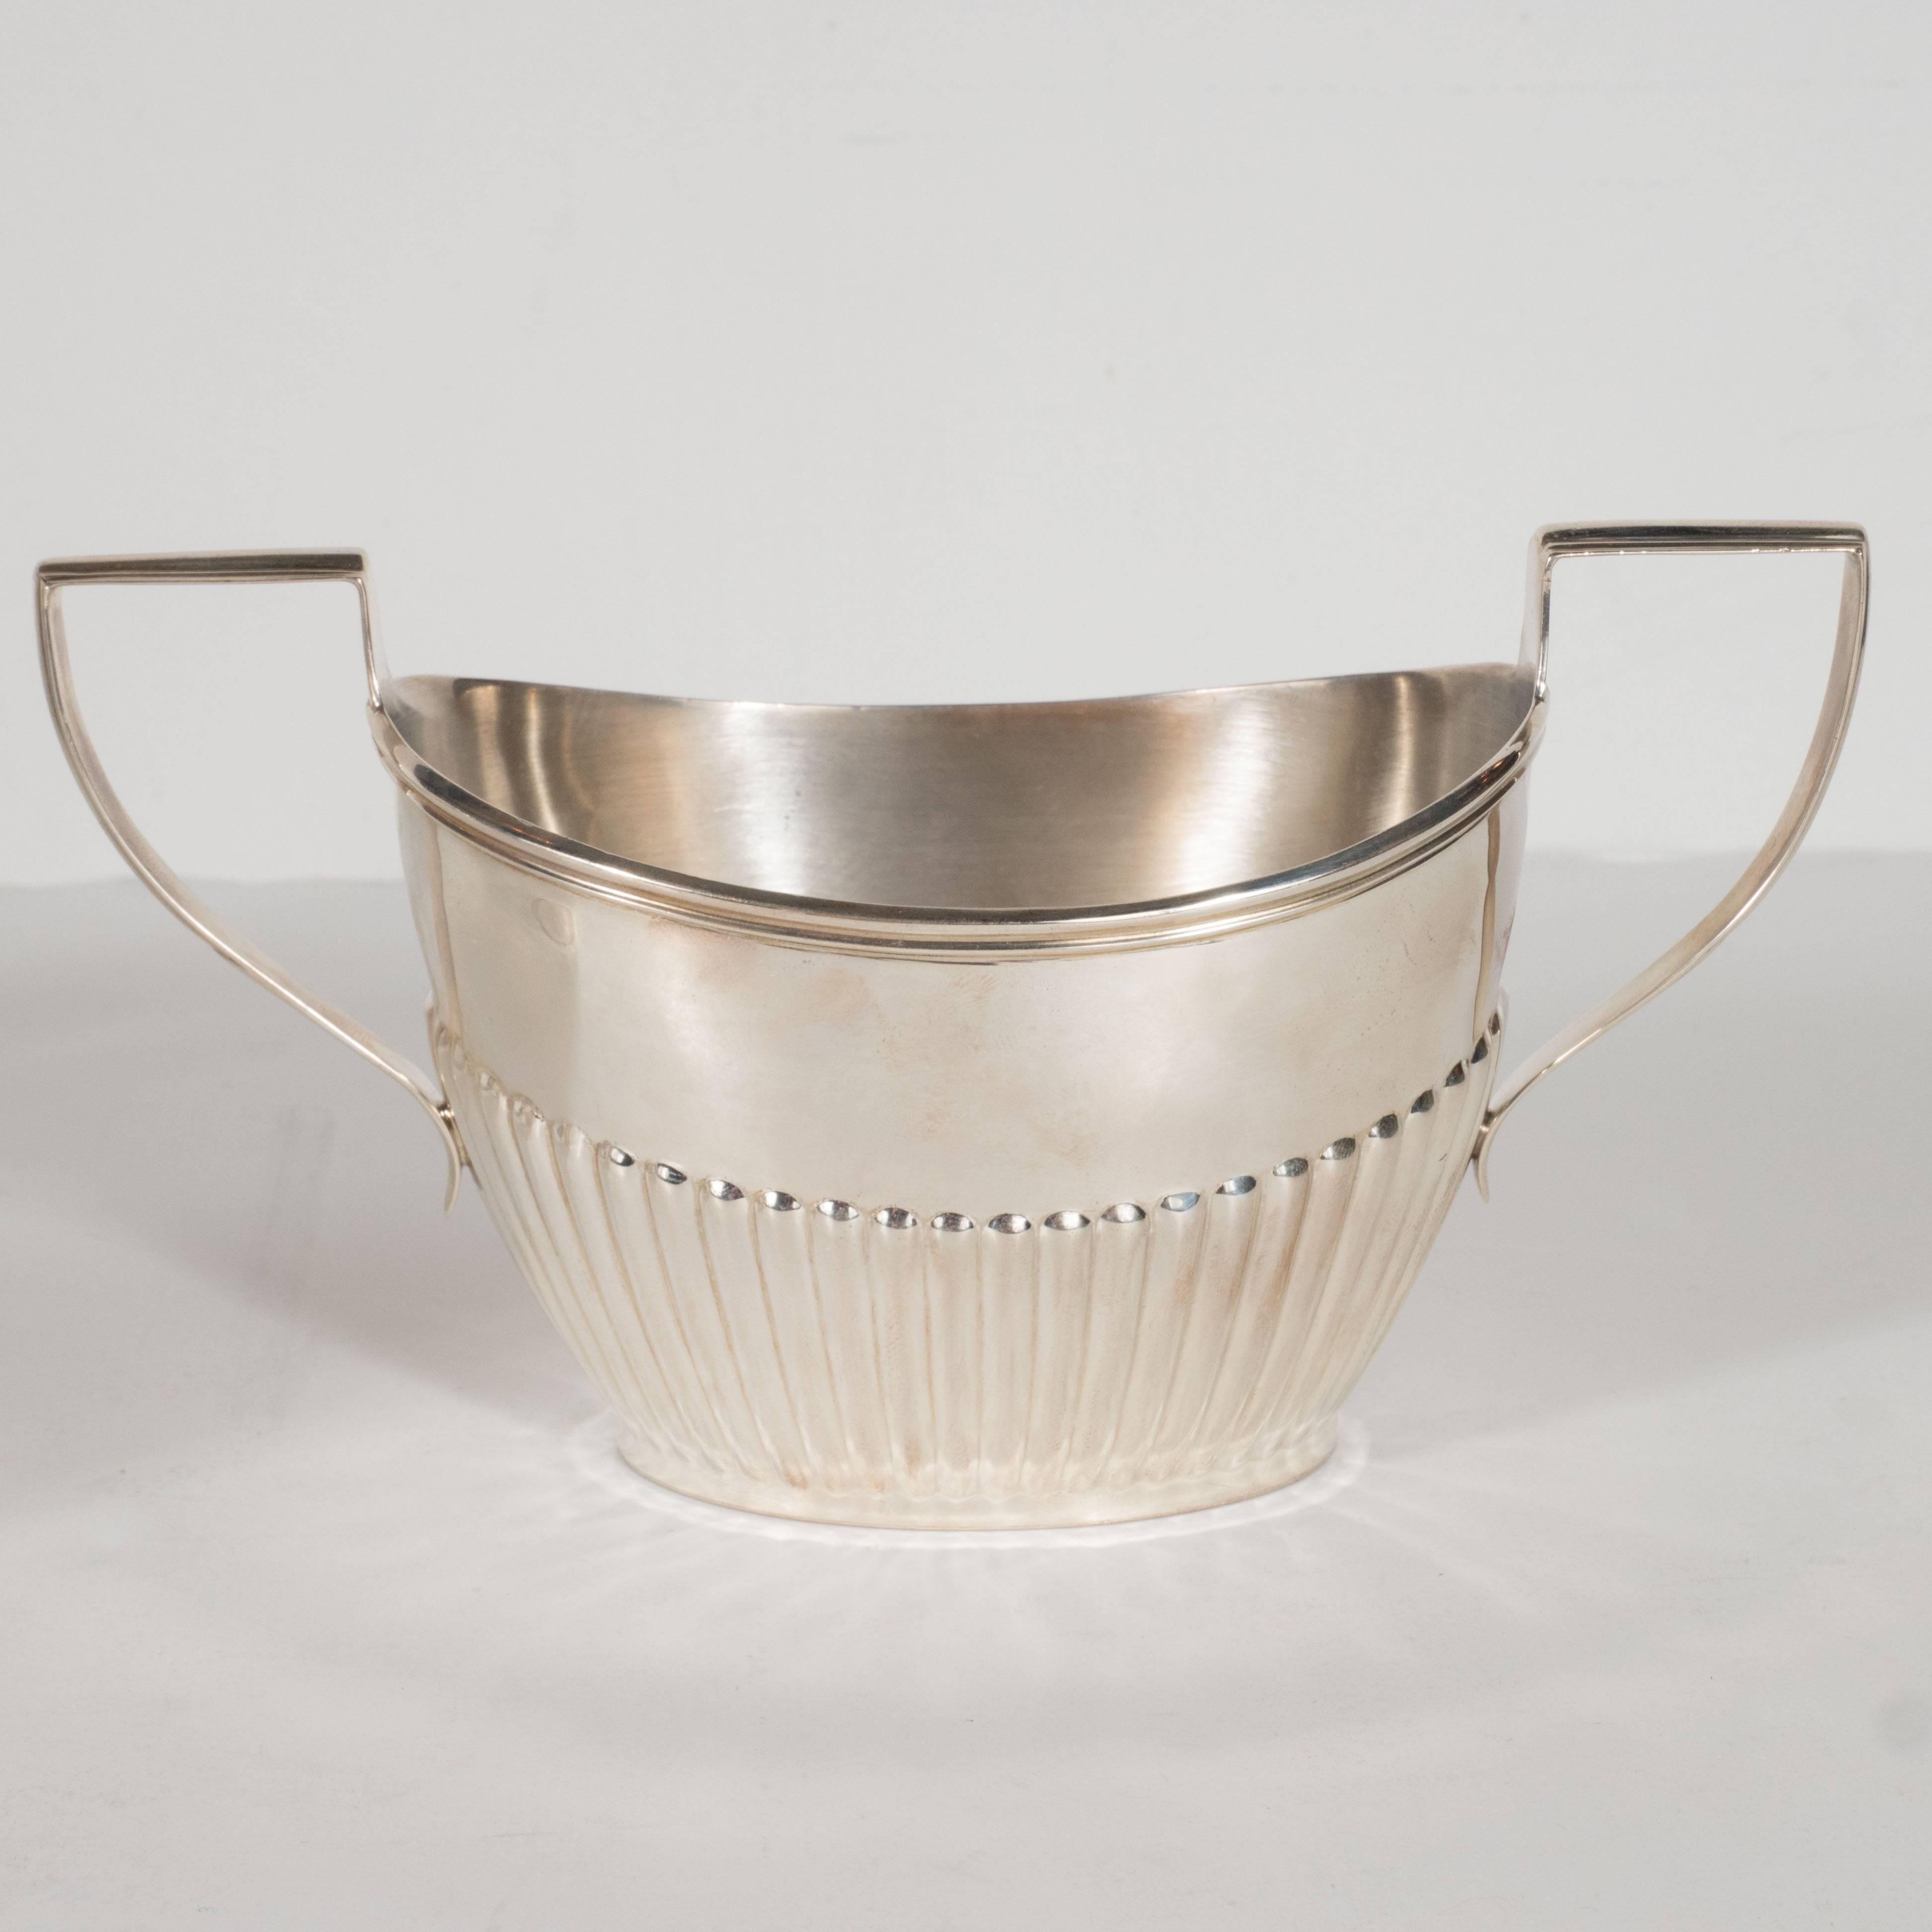 This refined coffee service, which includes a coffee pot, a cream saucer, and a sugar bowl. It was realized by Ryrie- one of the most illustrious silversmiths in Toronto since 1879- in the early 1930s. Each piece features raised fluted tubular